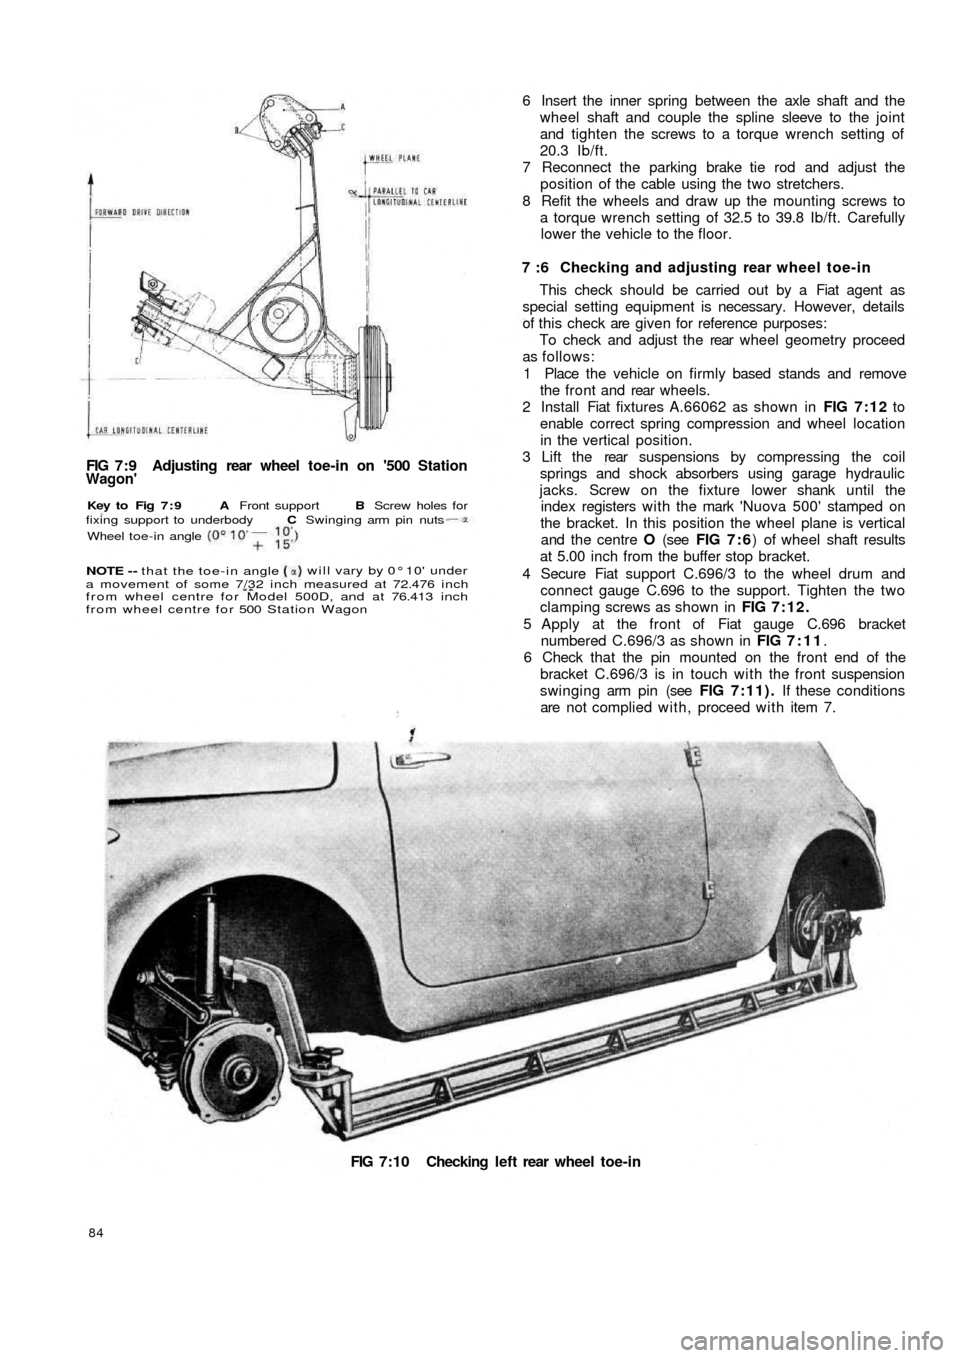 FIAT 500 1959 1.G Workshop Manual FIG 7:9  Adjusting  rear  wheel toe-in on 500 StationWagon
FIG 7:10 Checking left rear wheel toe-in
84
6 Insert the inner spring between the axle shaft and the
wheel shaft and couple the spline slee